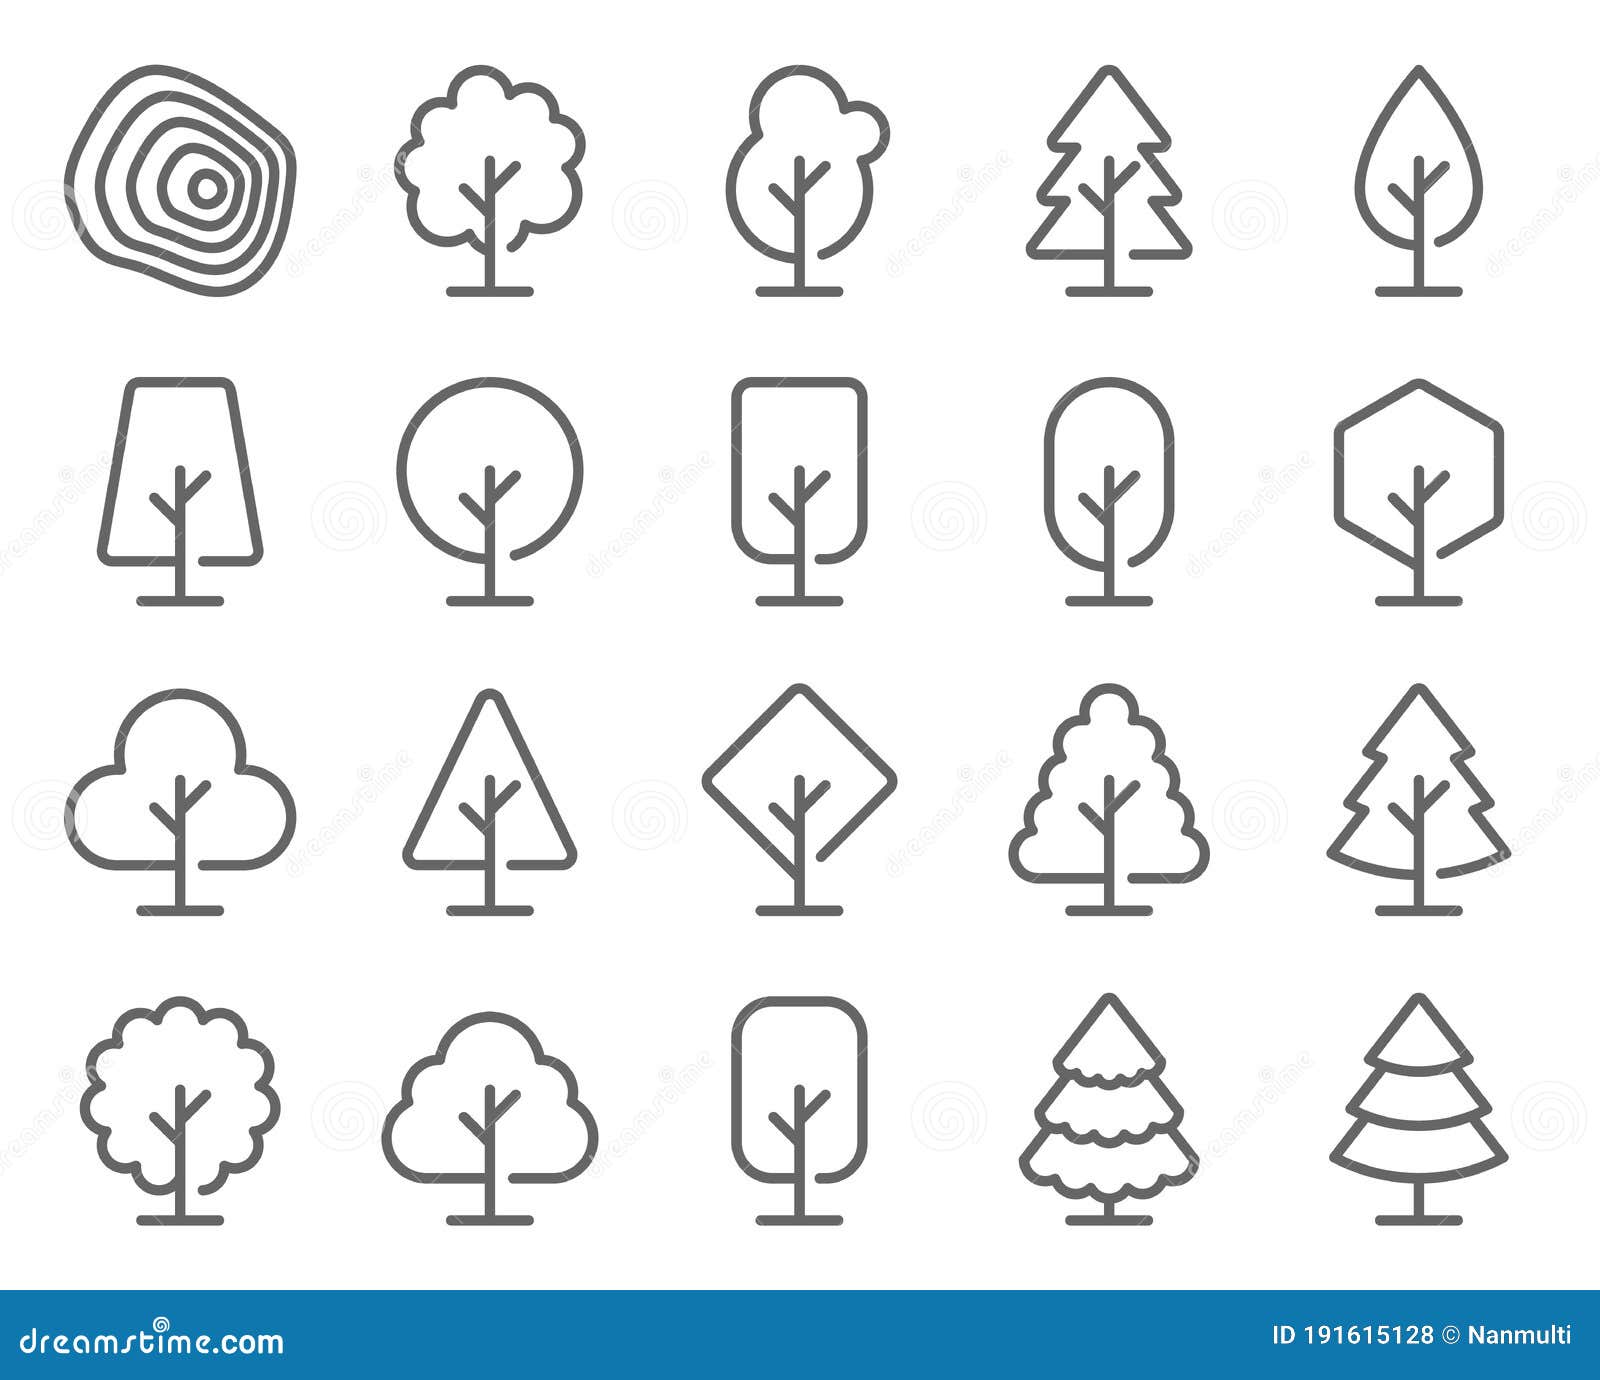 tree icon set  . contains such icon as plant, eco, wood, forest, nature, garden and more. expanded stroke